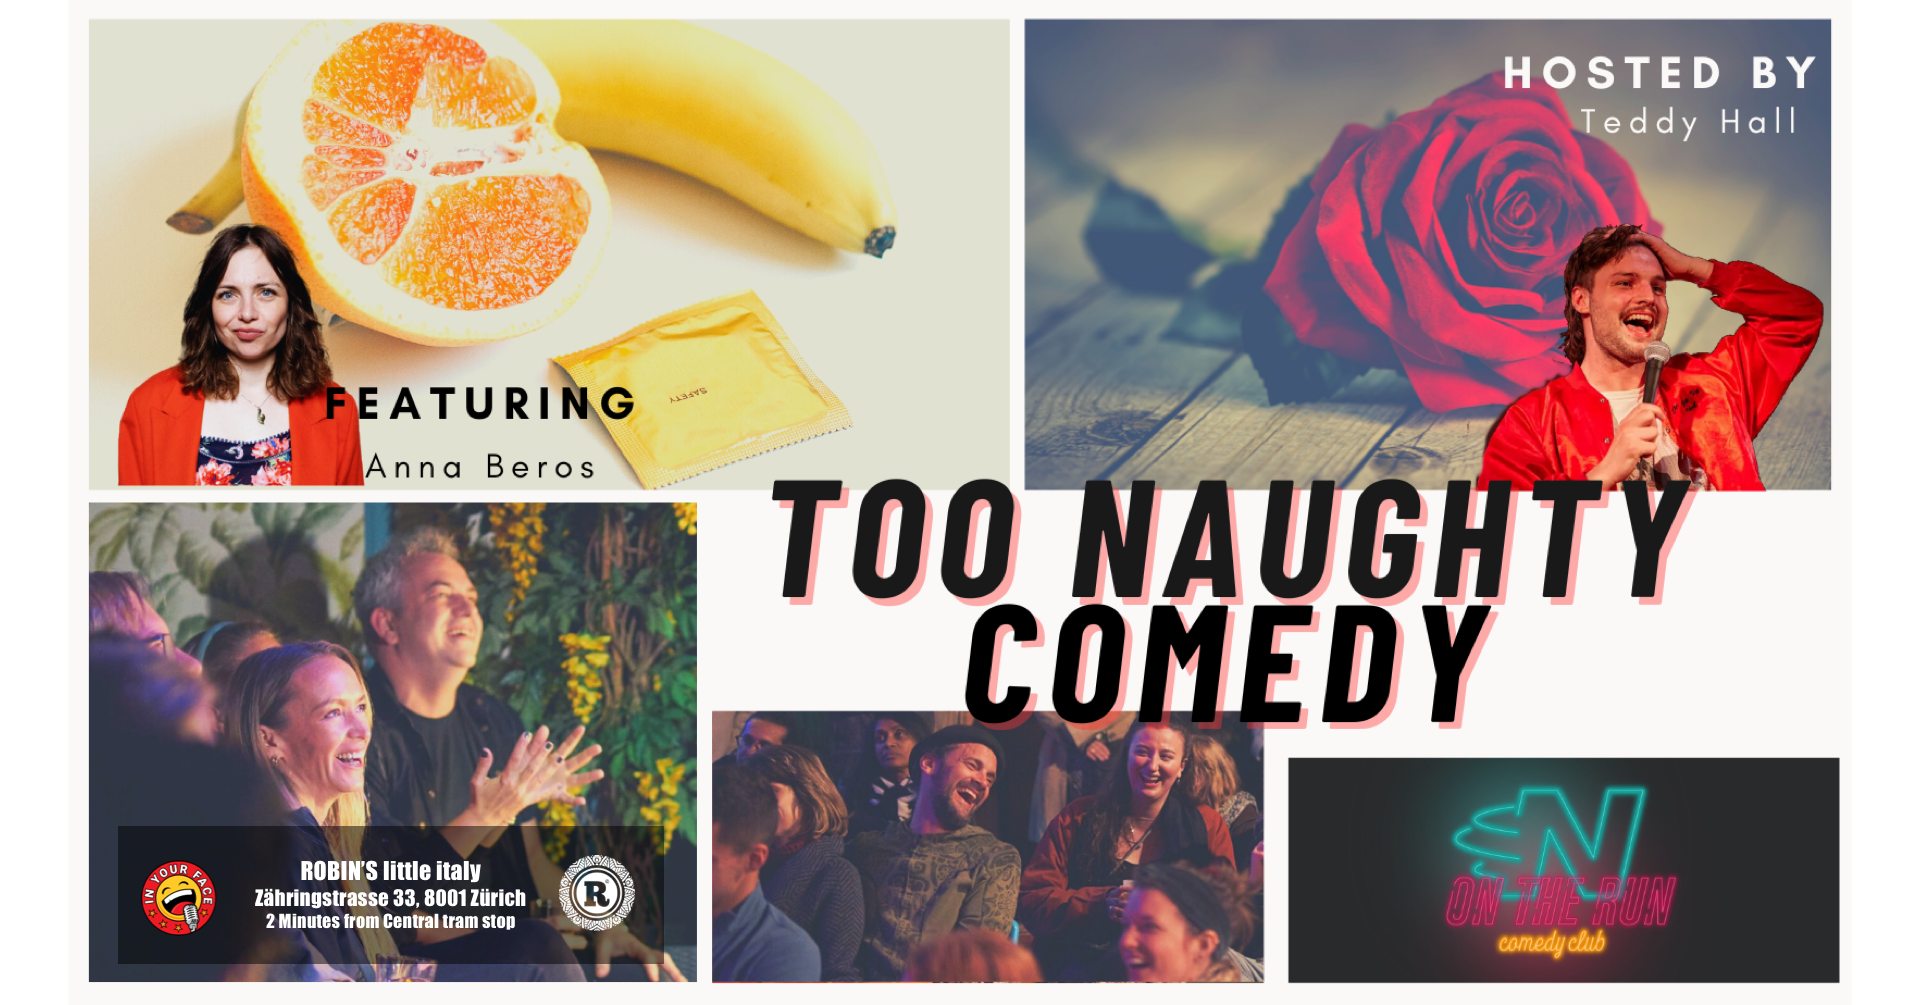 IN YOUR FACE Presents Too Naughty Comedy